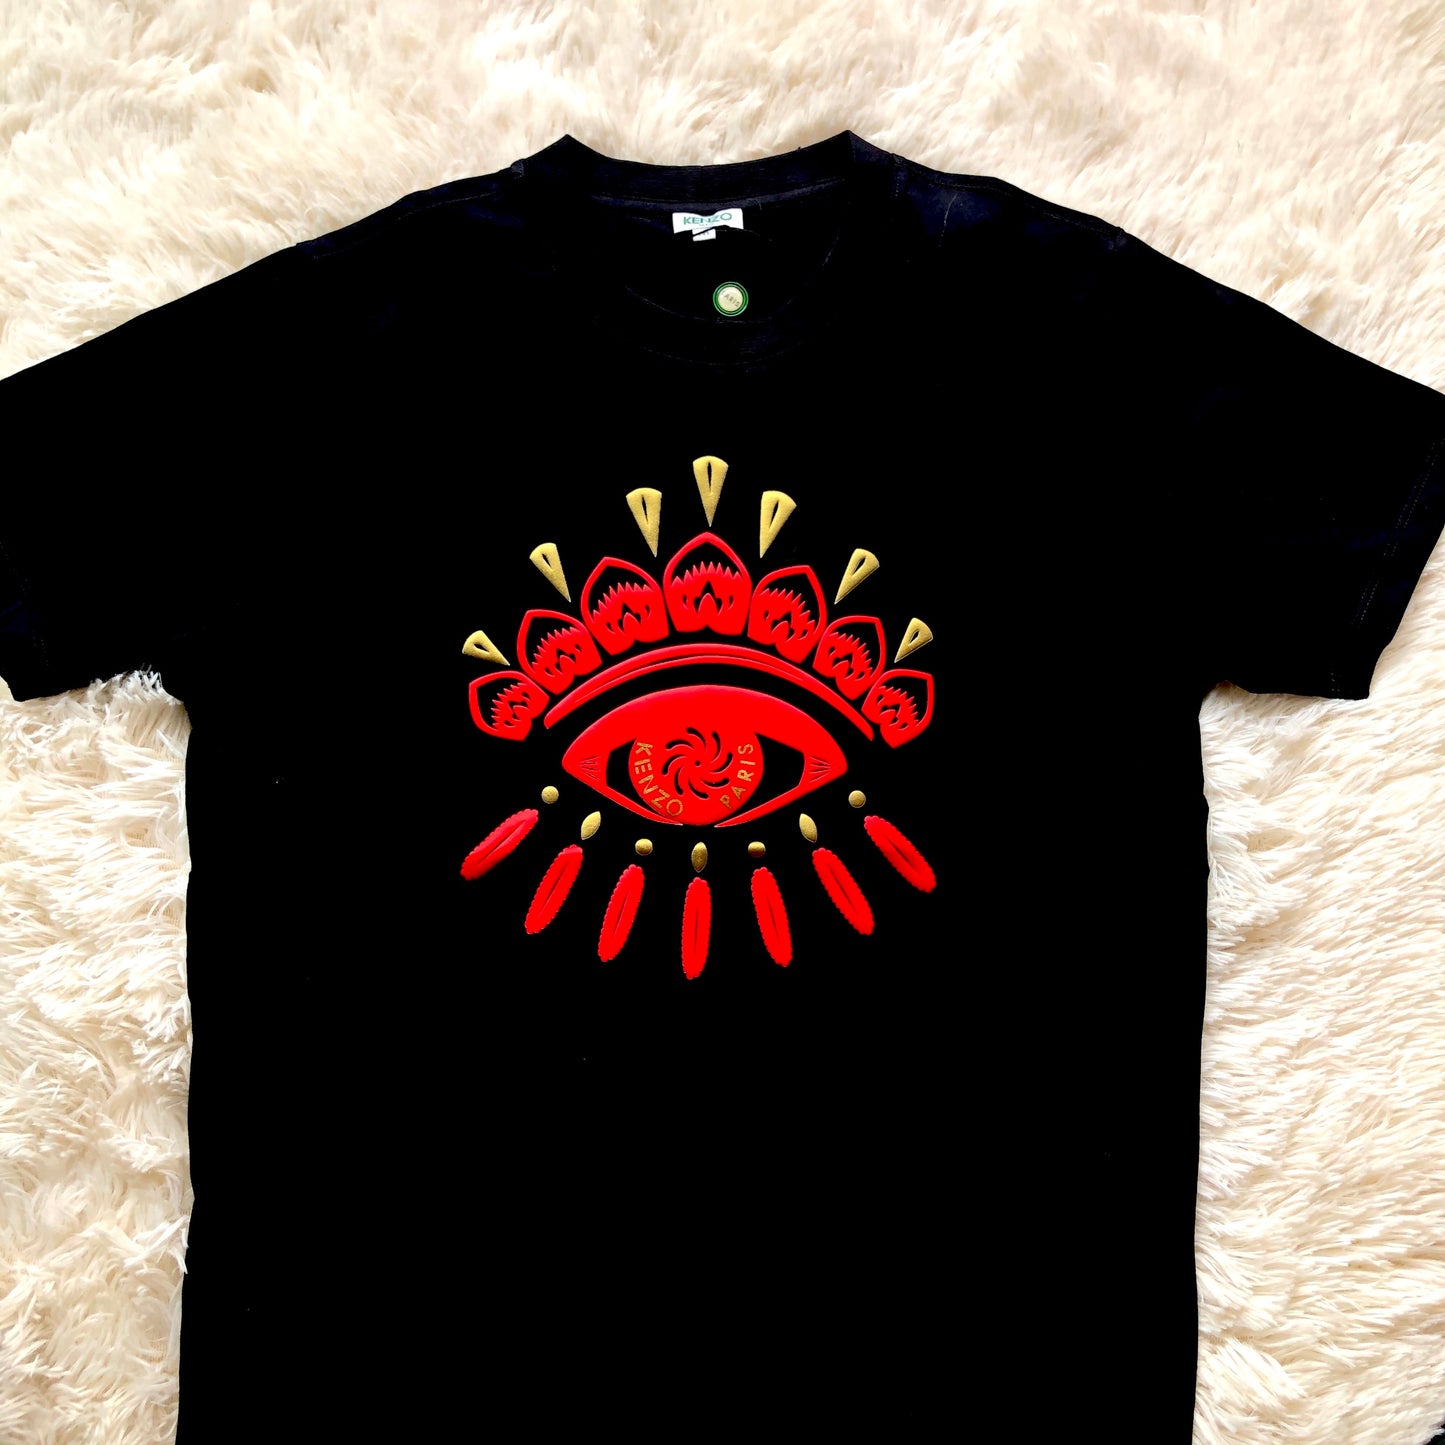 Kenzo 3D Red Eye Logo T-Shirt - Shop Streetwear, Sneakers, Slippers and Gifts online | Malaysia - The Factory KL